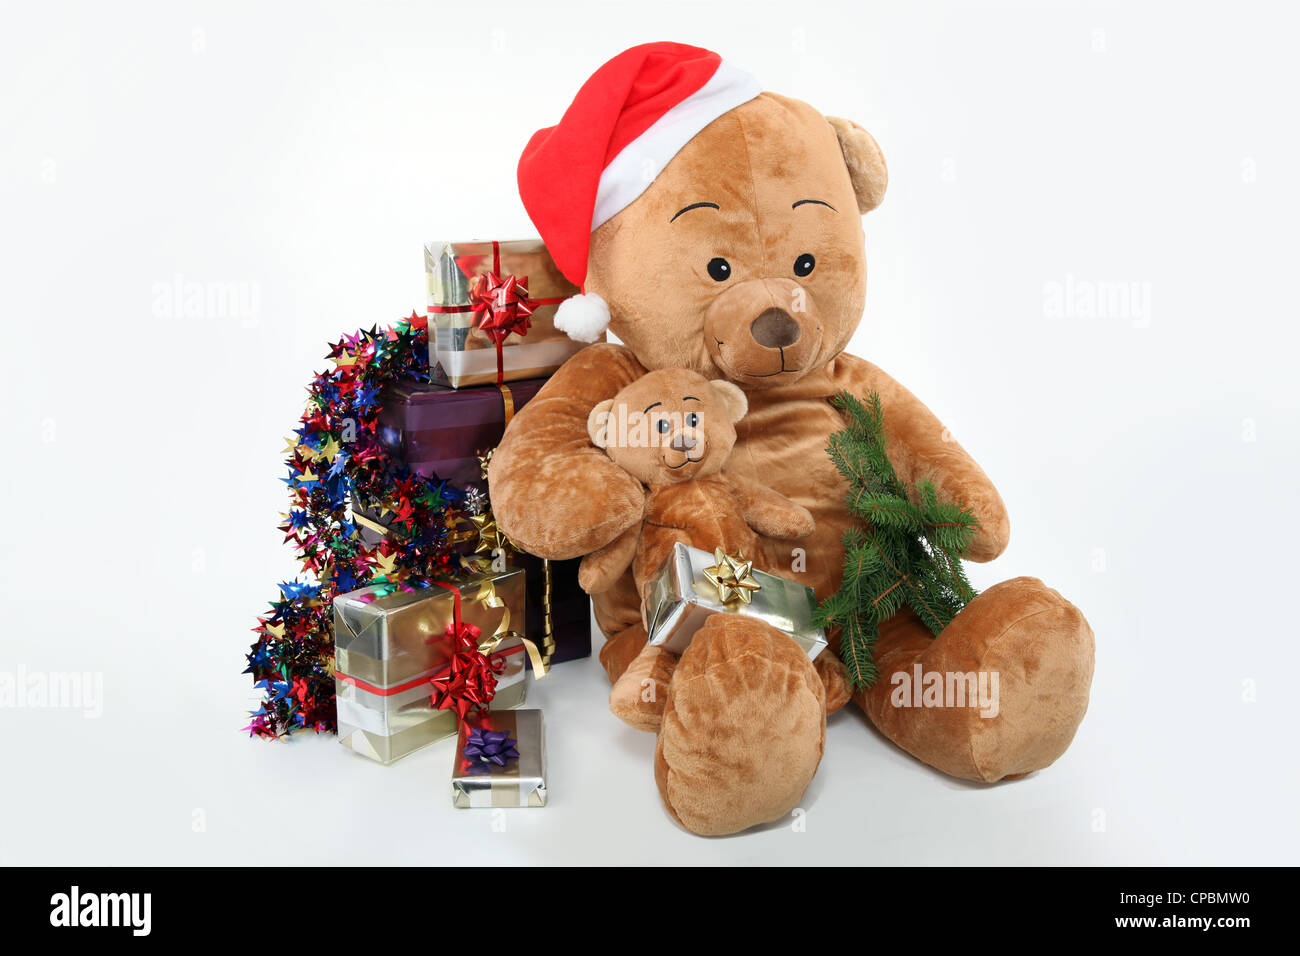 Huge teddy bear and Christmas gifts on white background Stock Photo